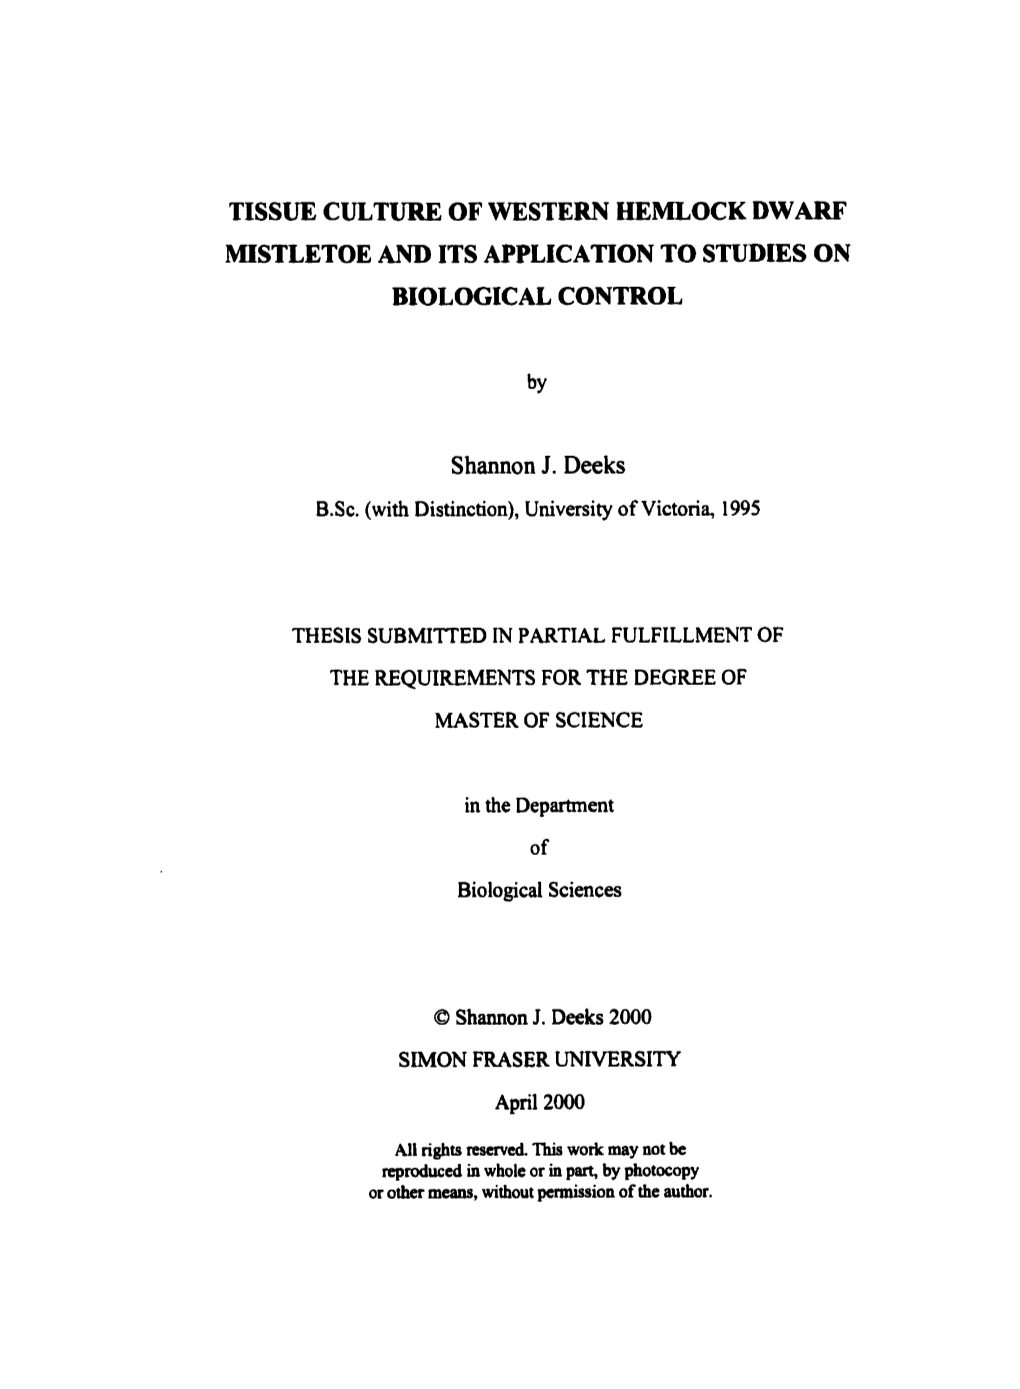 Tissue Culture of Western Hemlock Dwarf Mistletoe and Its Application to Studies on Biological Control